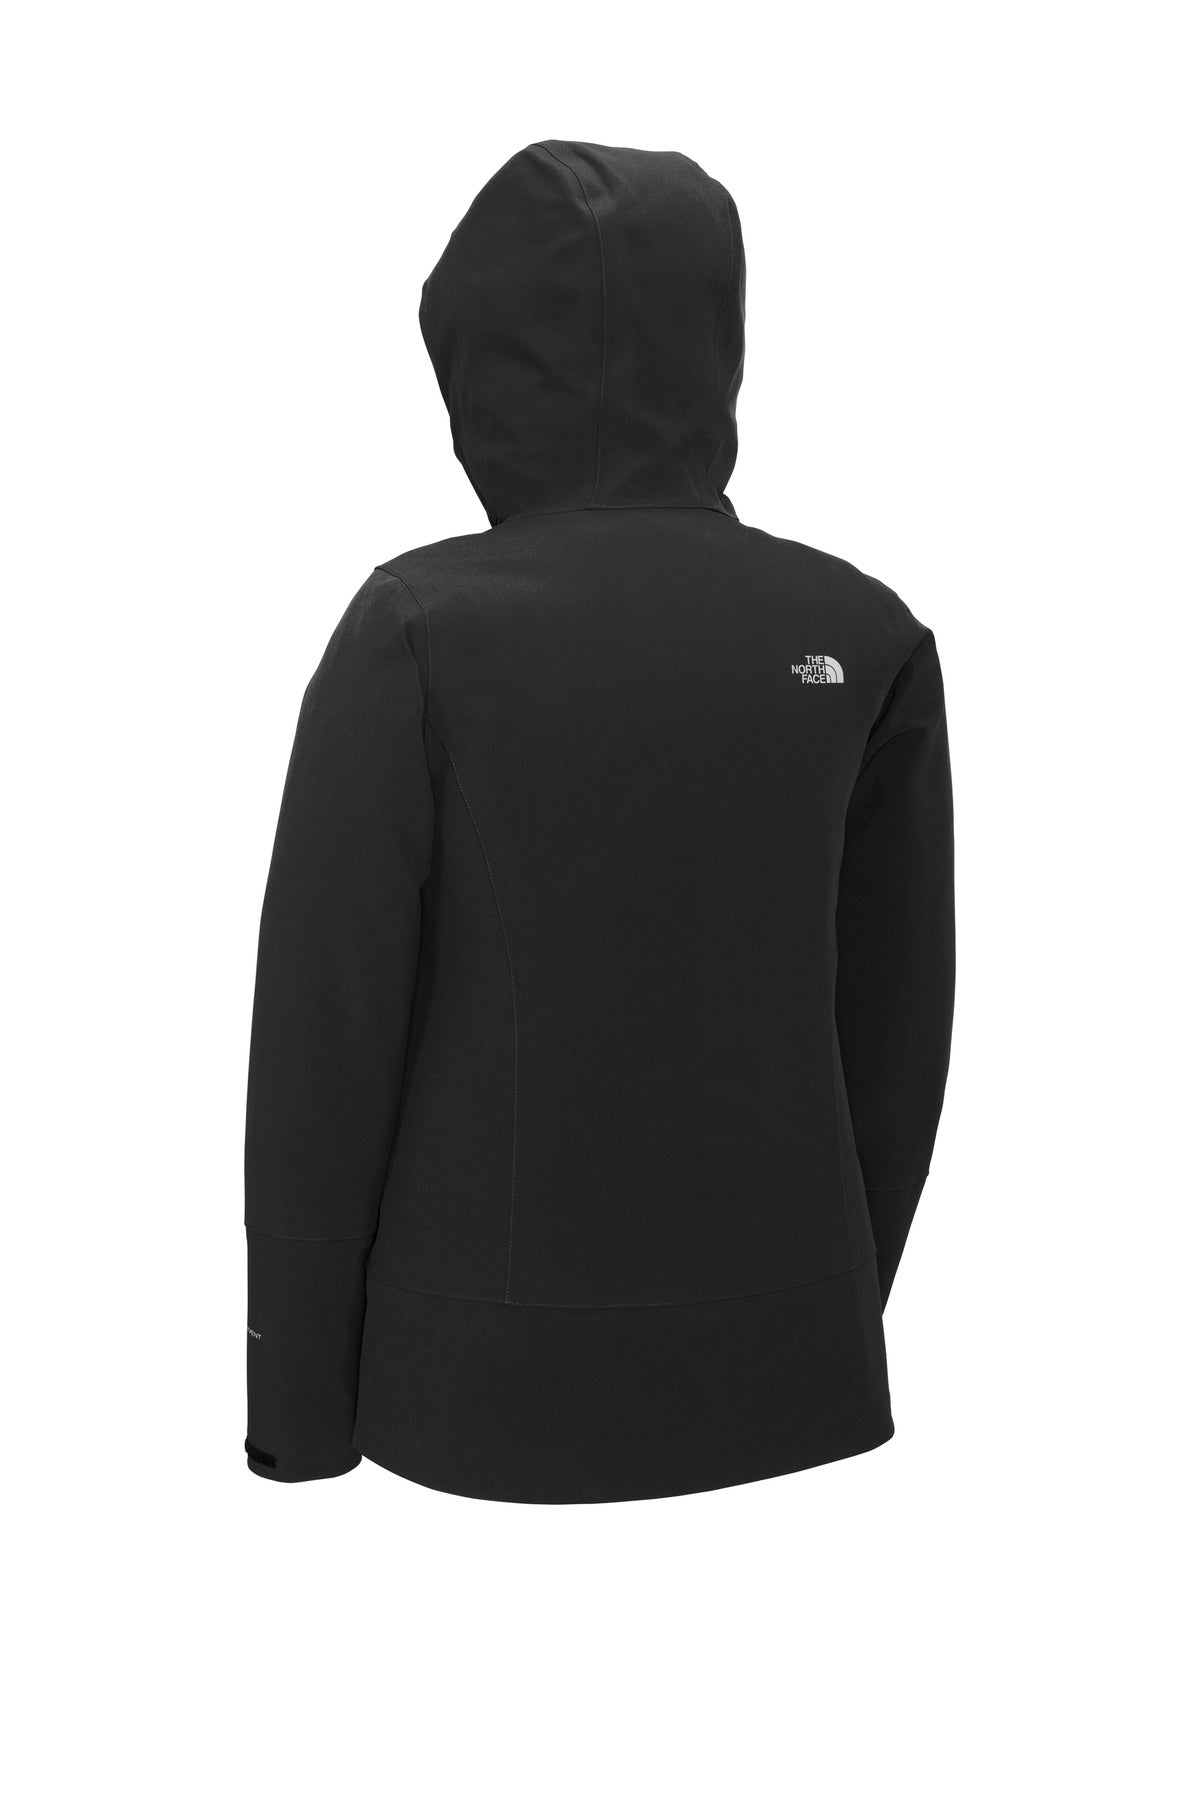 The North Face Ladies Apex DryVent ™ Jacket NF0A47FJ